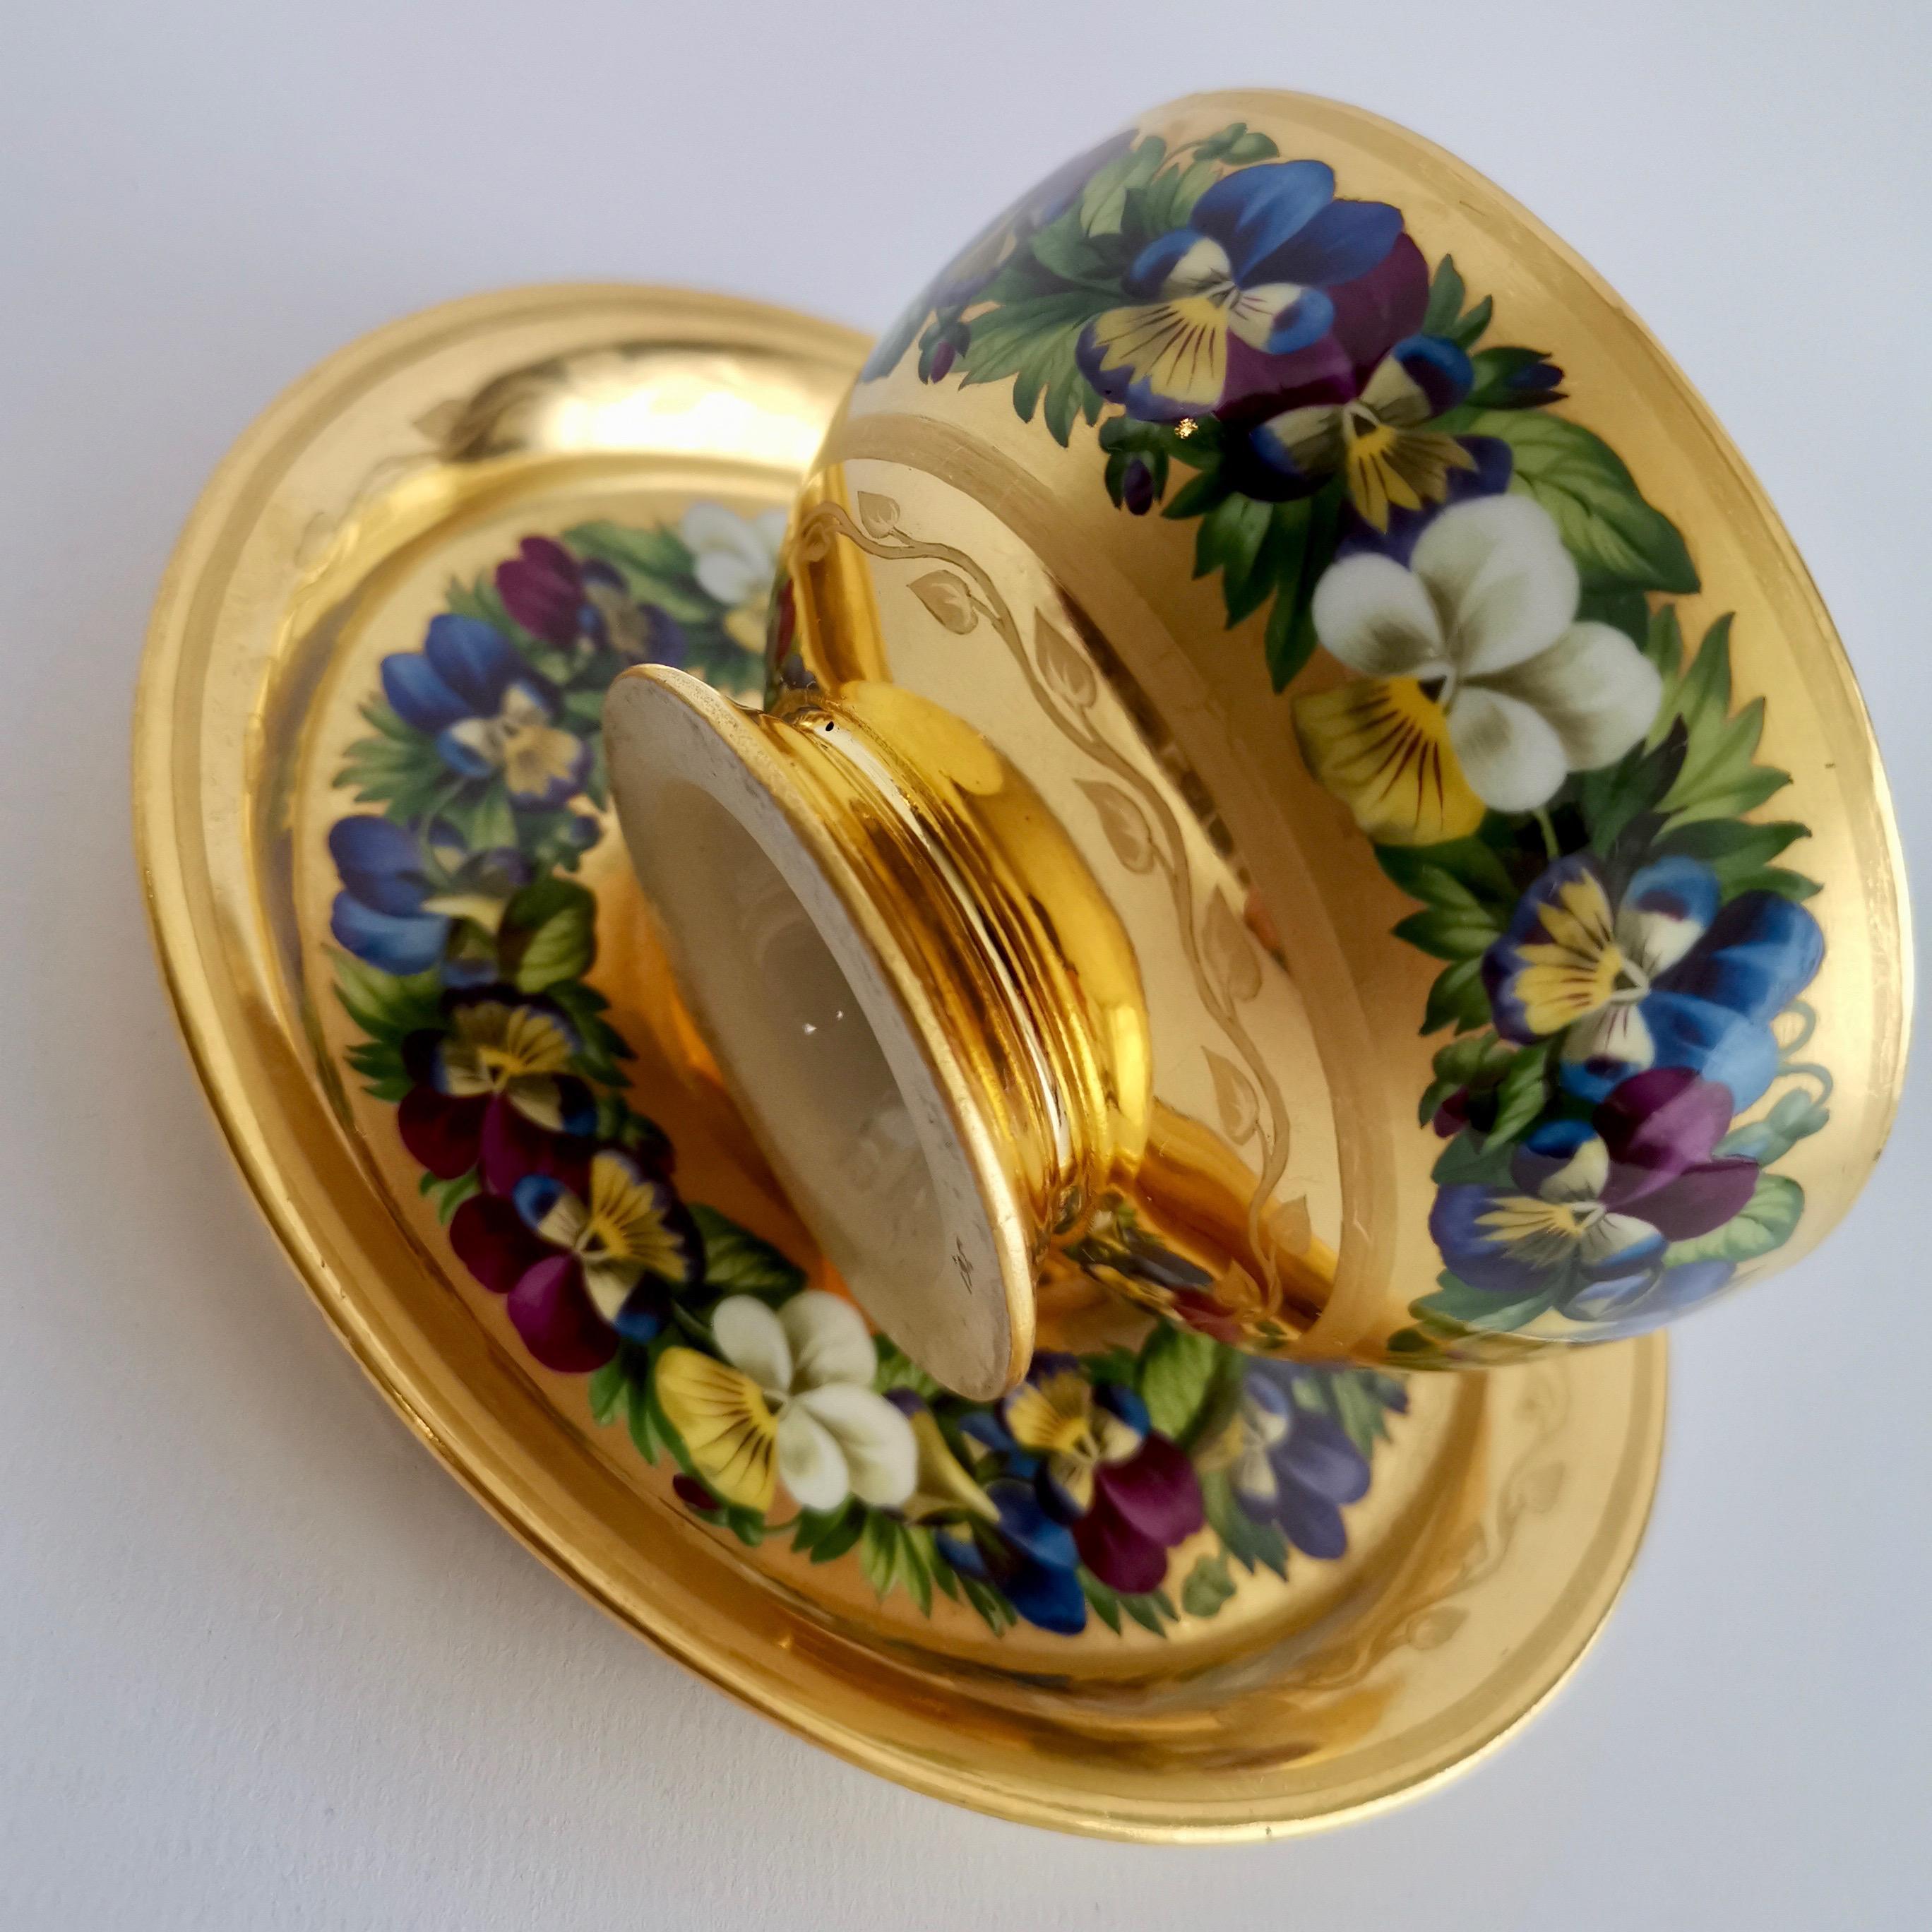 Early 19th Century Vienna Porcelain Teacup and Saucer, Gilt and Pansies by Anton Friedl, 1826